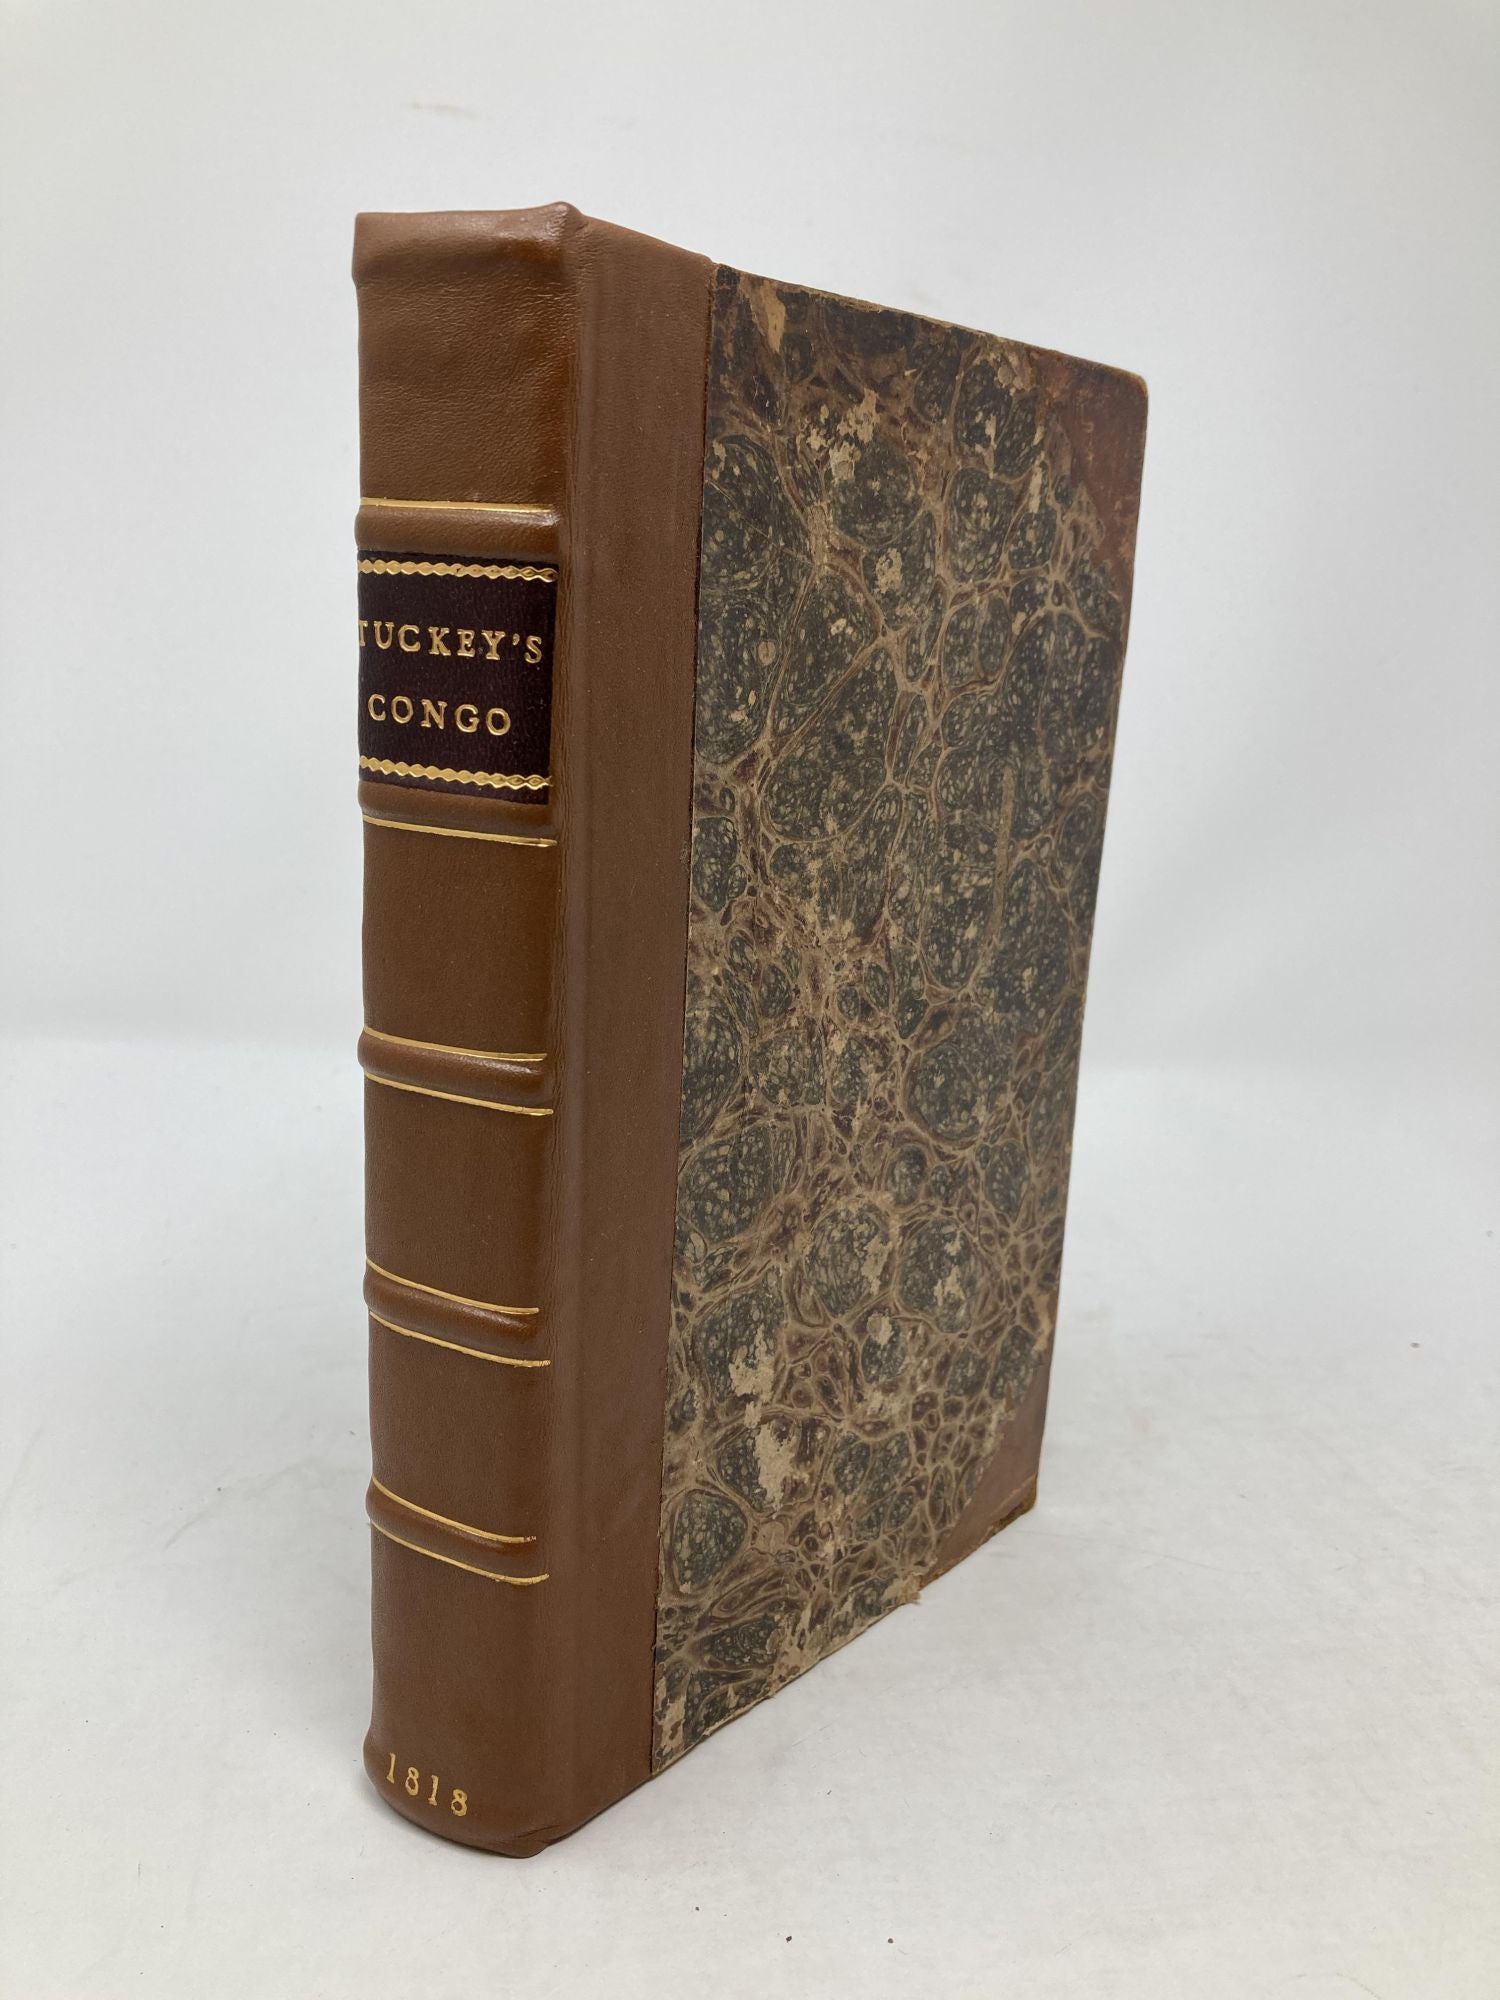 Tuckey, Capt. J.K. - Narrative of an Expedition to Explore the River Zaire, Usually Called the Congo in South Africa in 1816, Under the Direction of Captain J.K. Tuckey, R.N. , to Which Is Added, the Journal of Professor Smith; and Some General Observations on the Country and Its Inhabitants